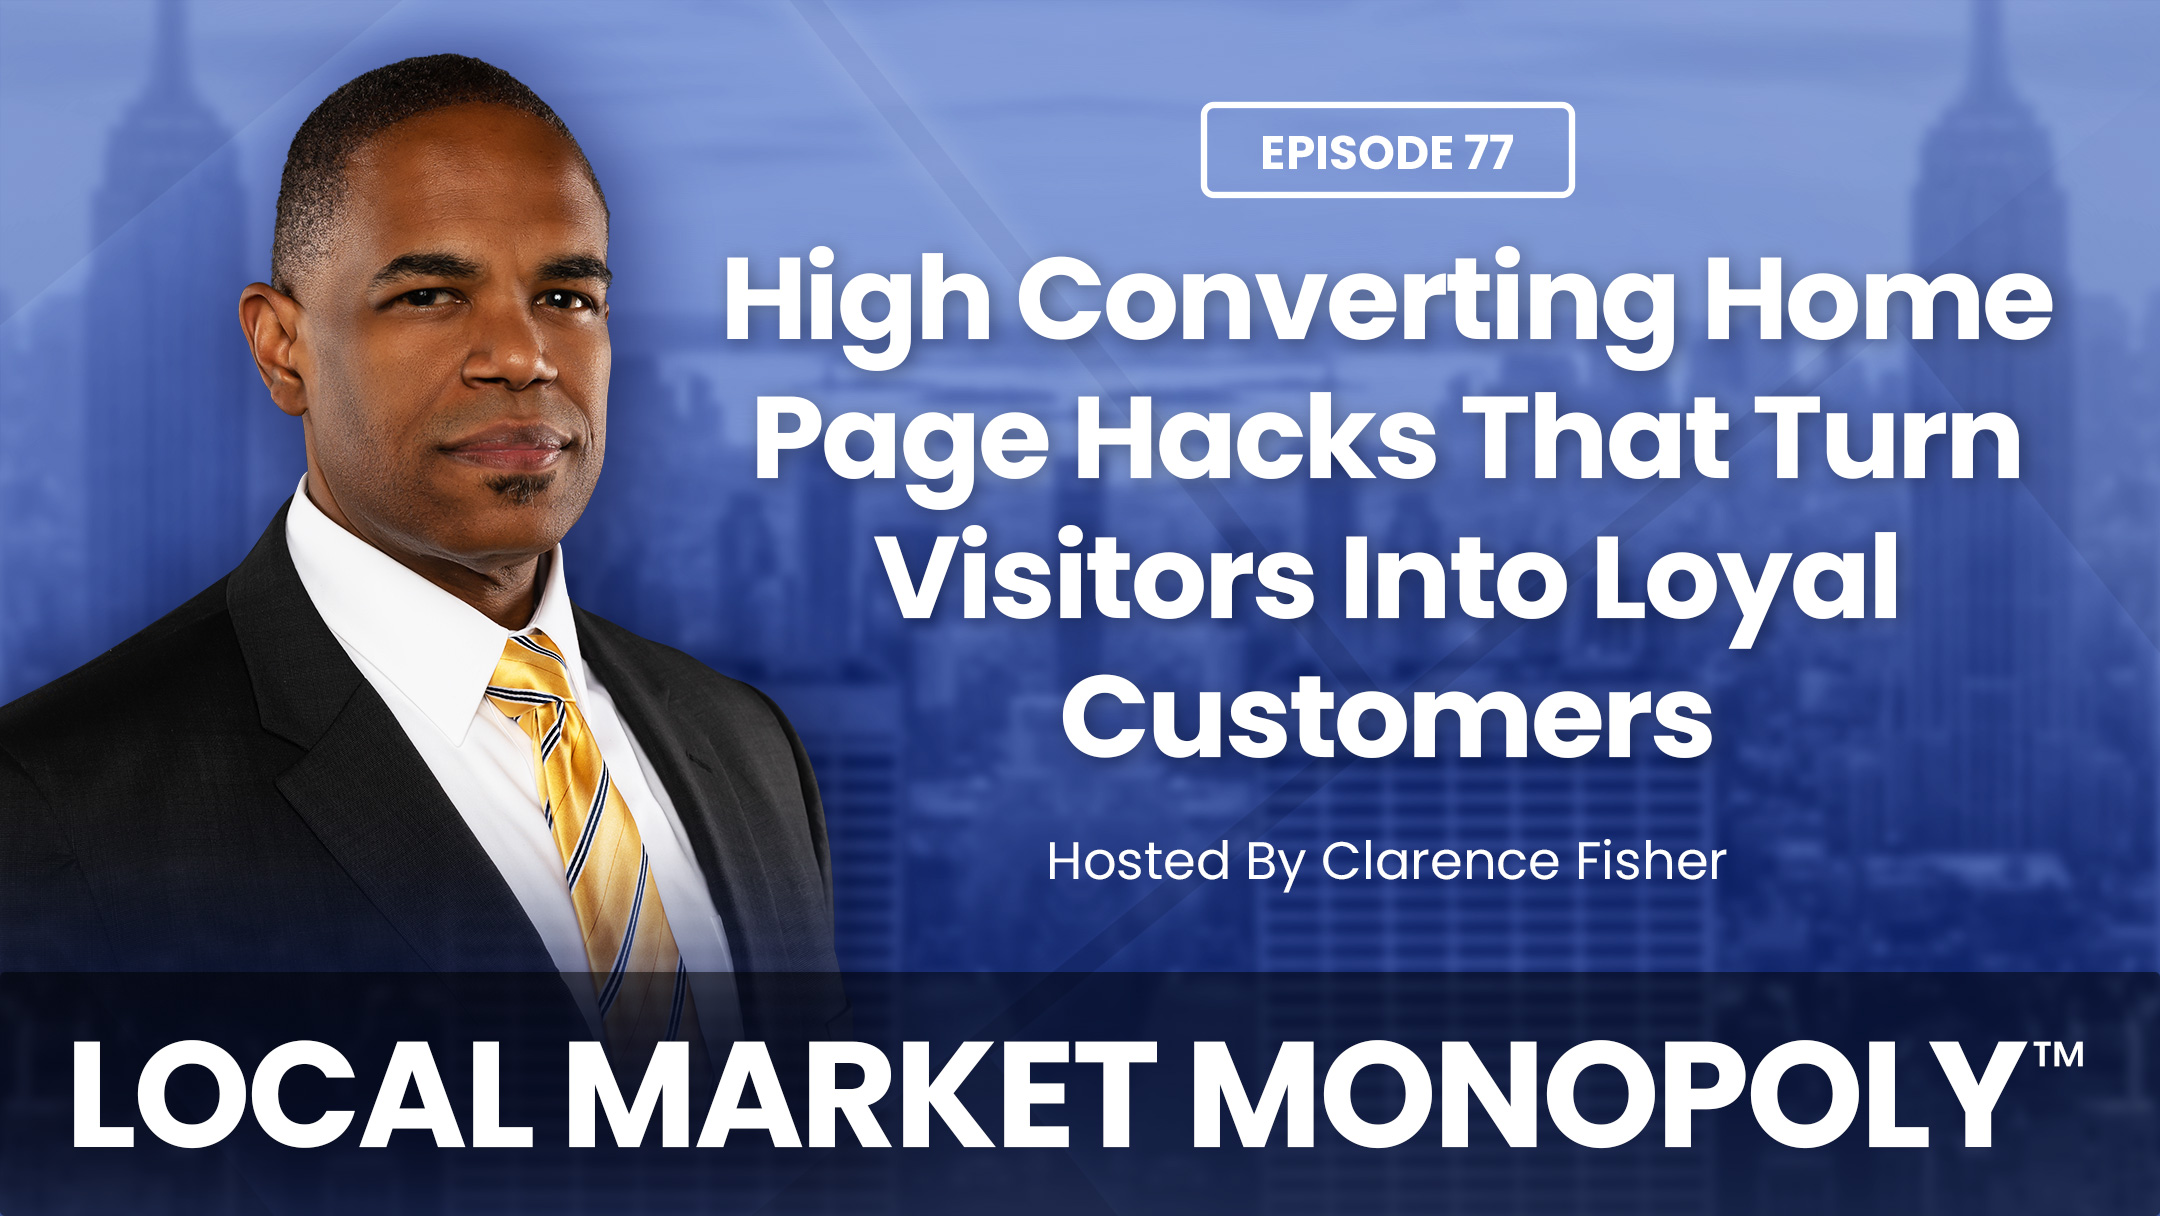 High Converting Home Page Hacks That Turn Visitors Into Loyal Customers